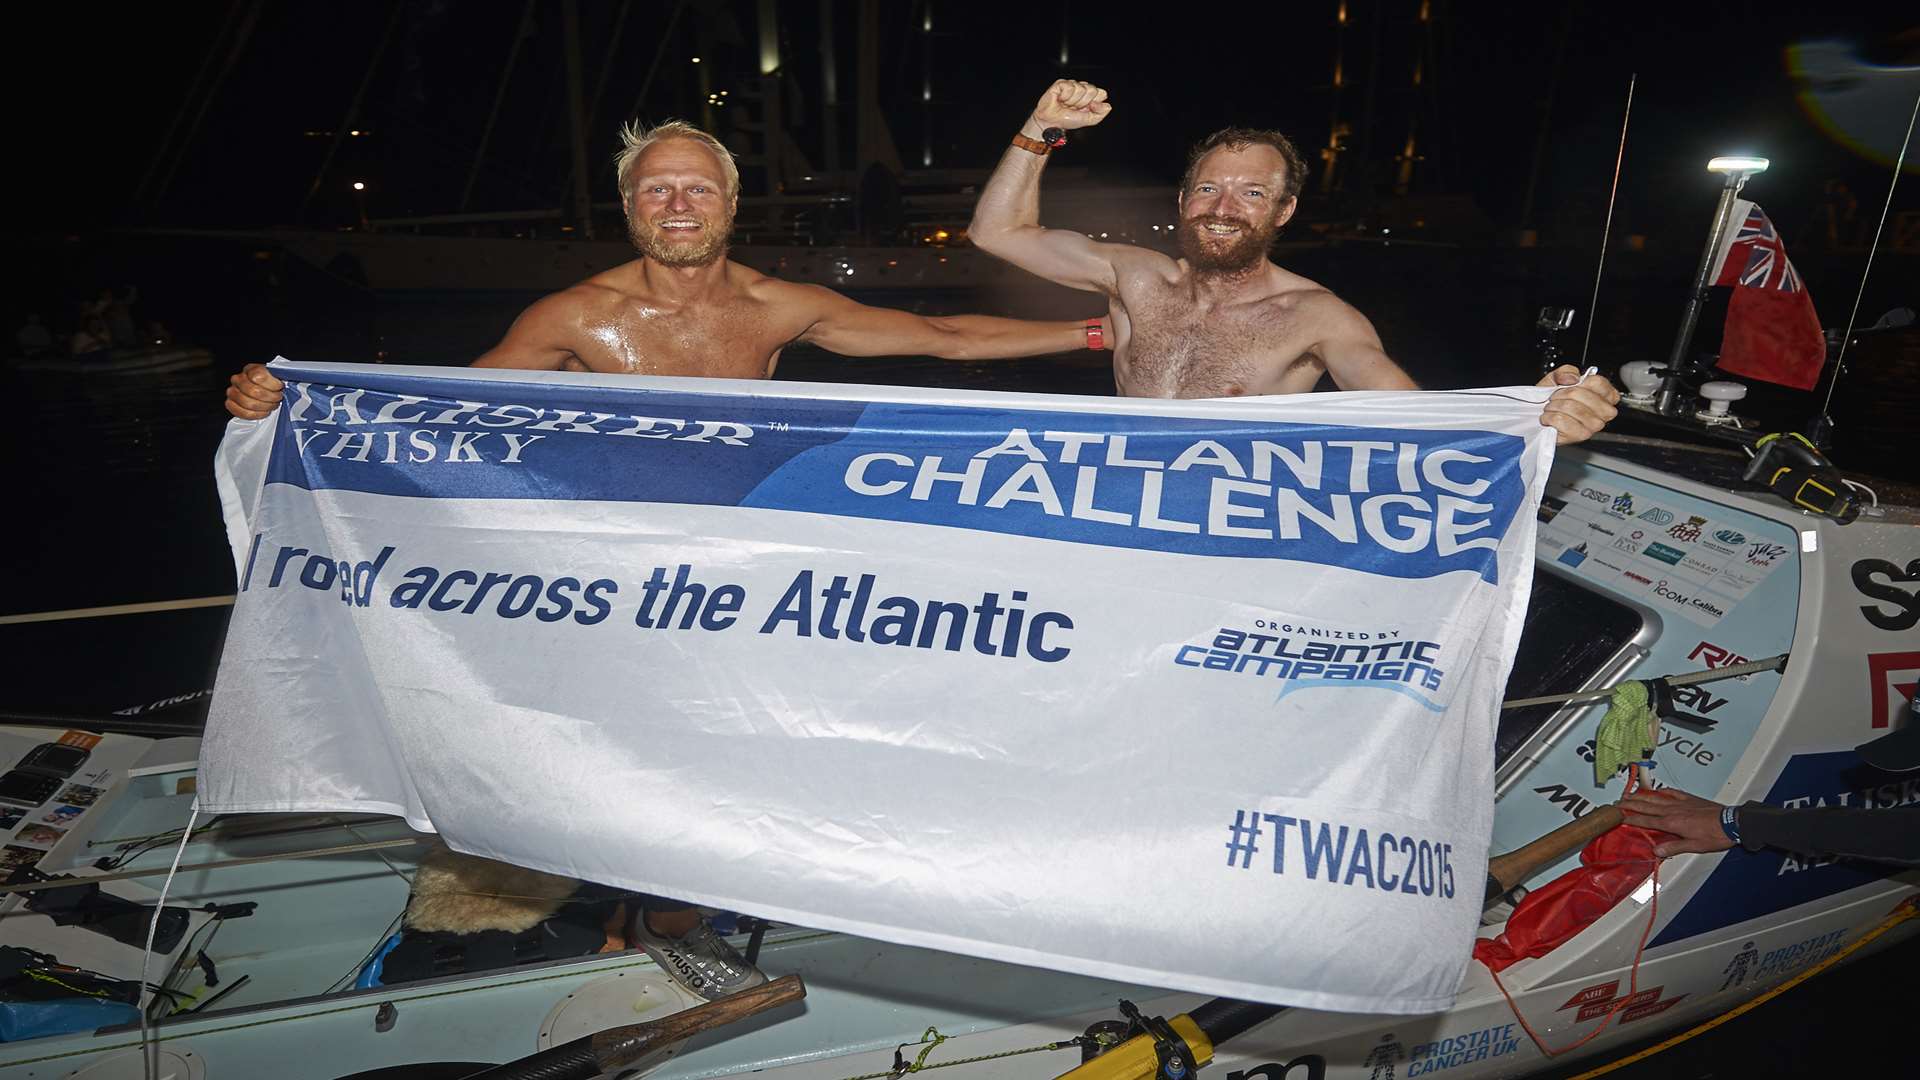 Olly Clark and Dan Parsons celebrated the end of their epic challenge